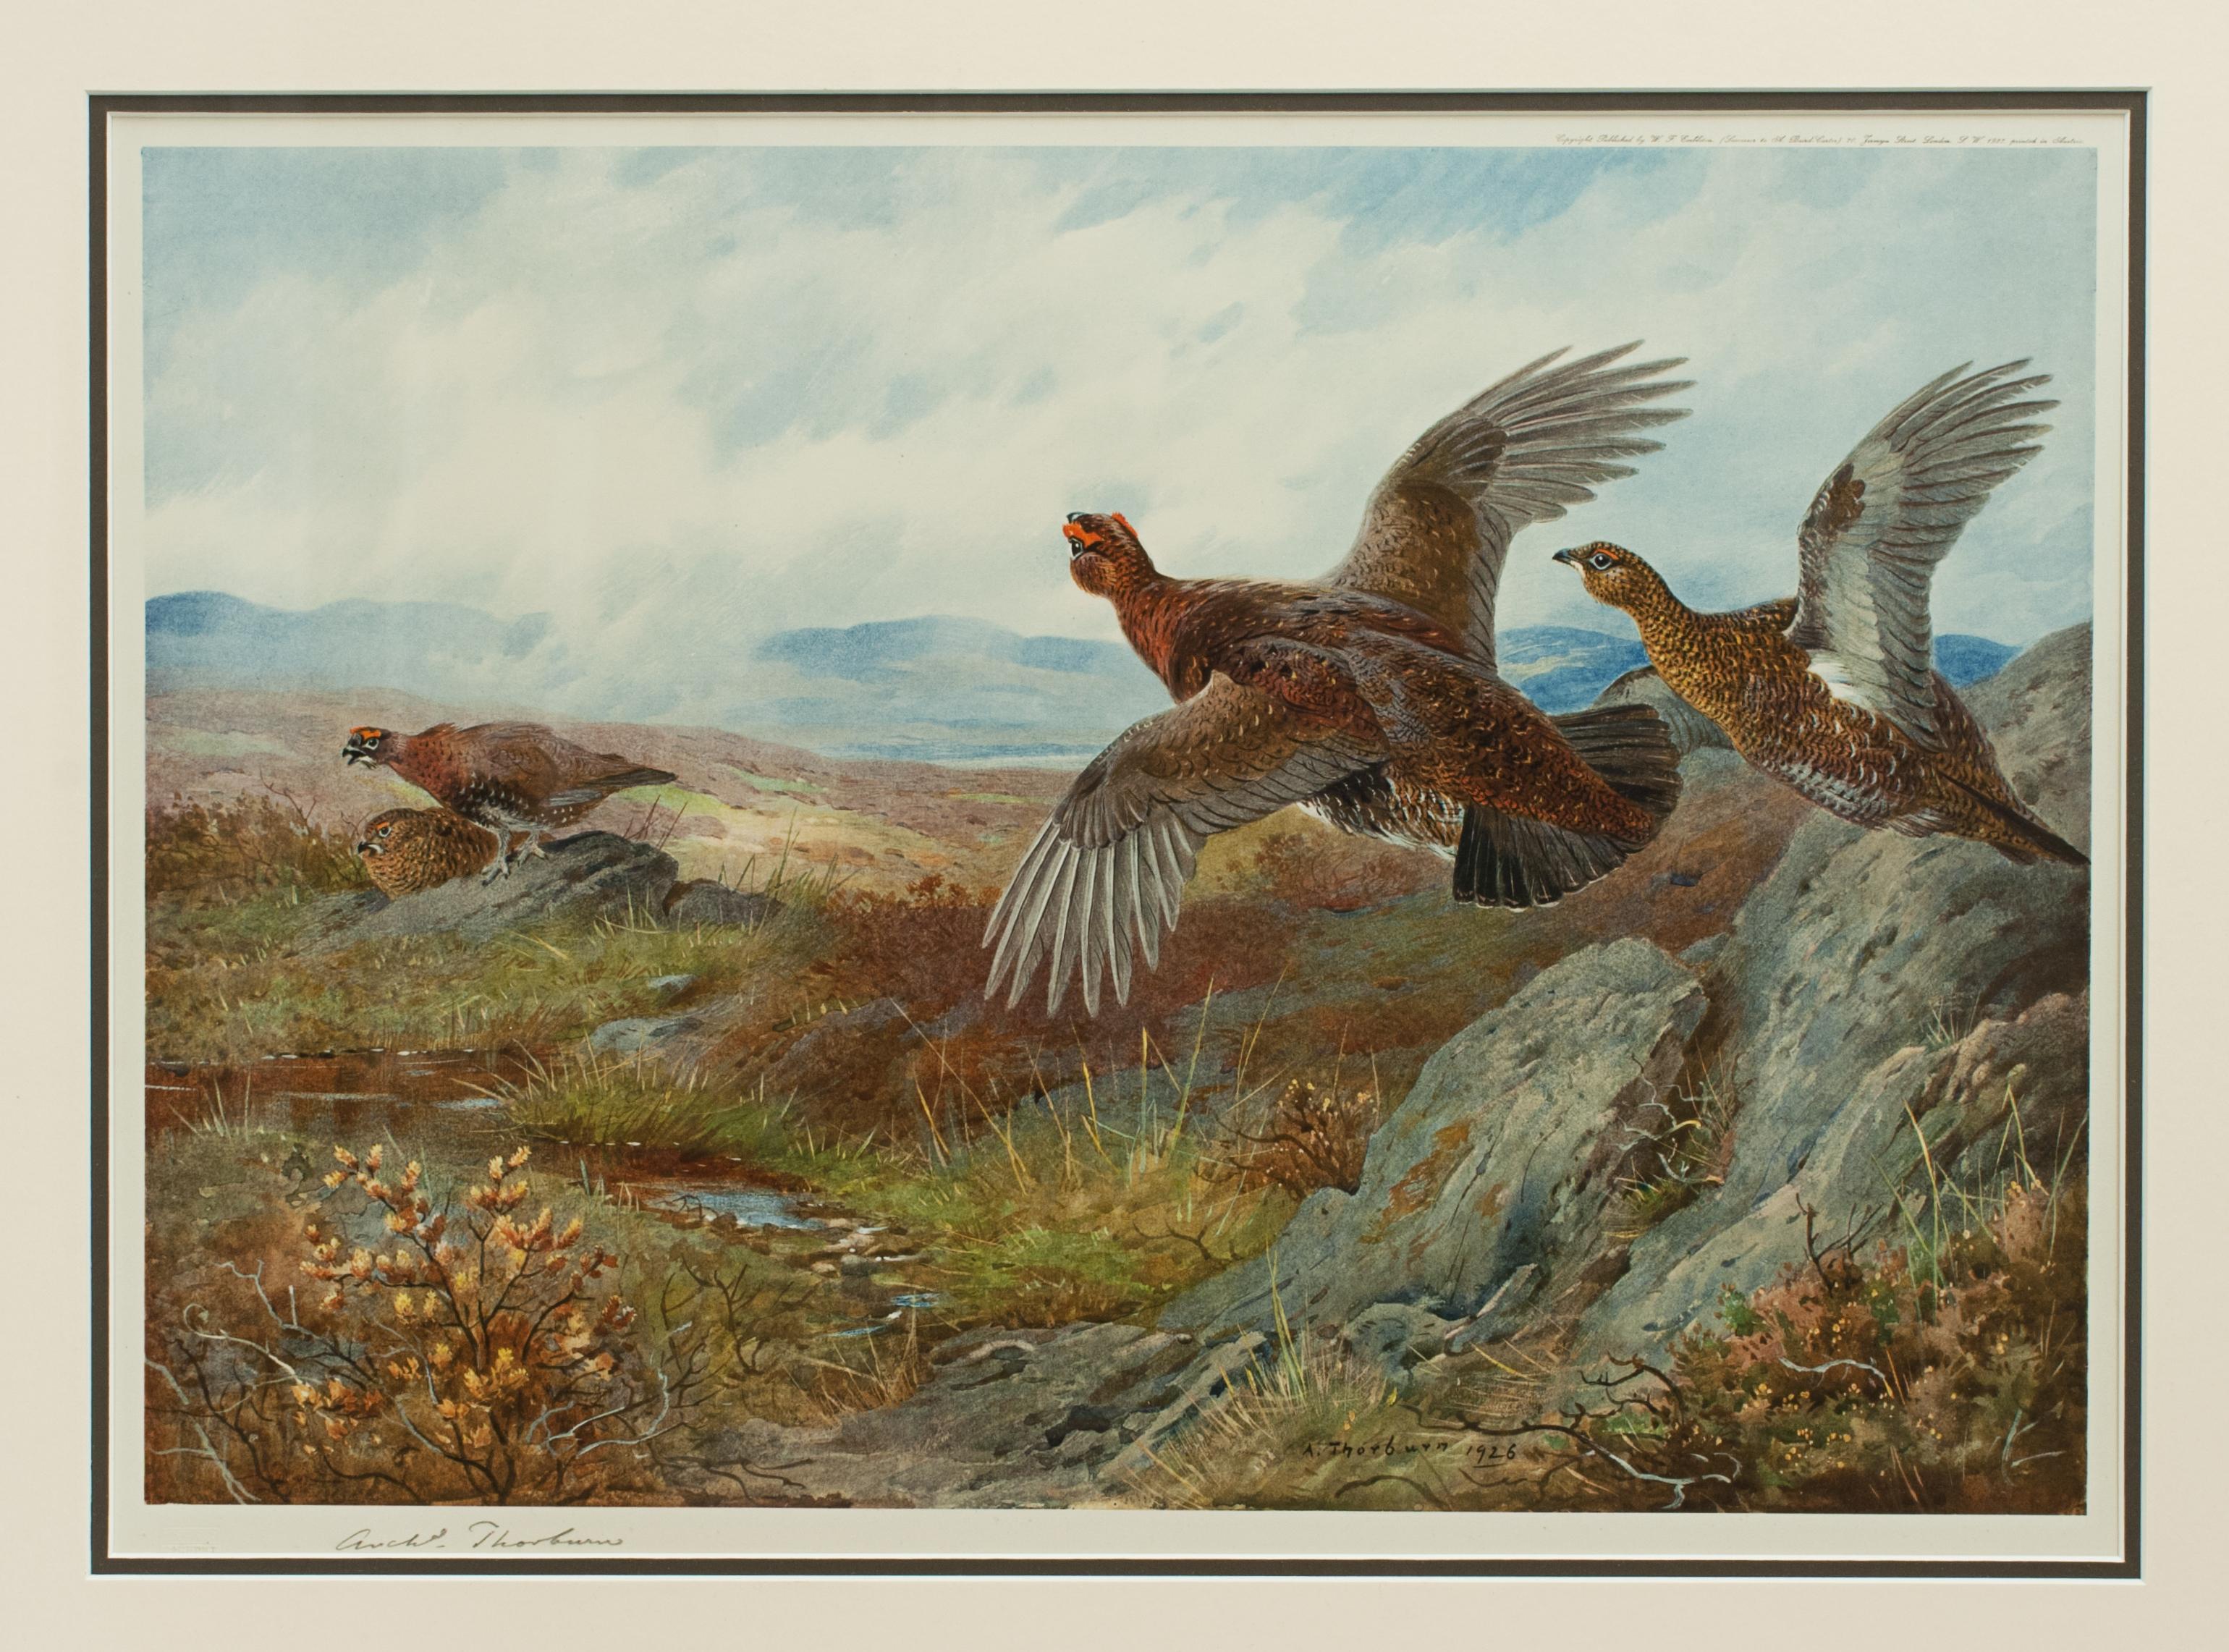 Vintage Game Bird Prints, Colotypes by Archibald Thorburn 'The Seasons' 1